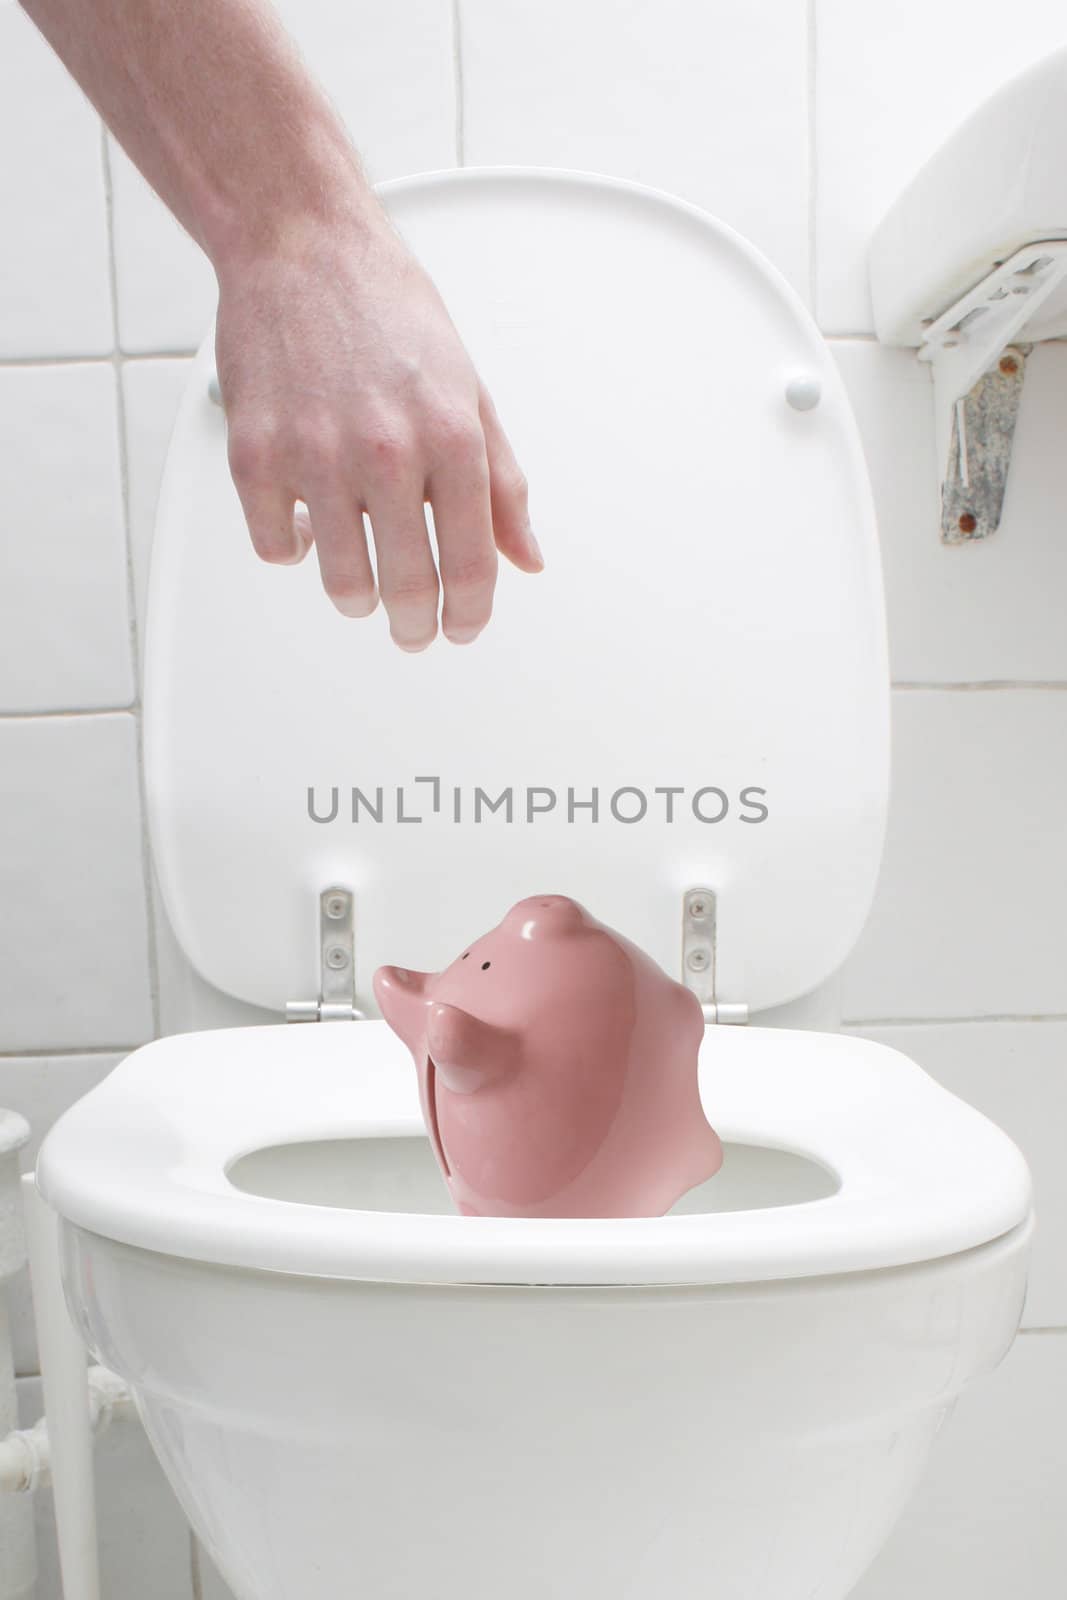 Throwing the piggy bank out in the toilet